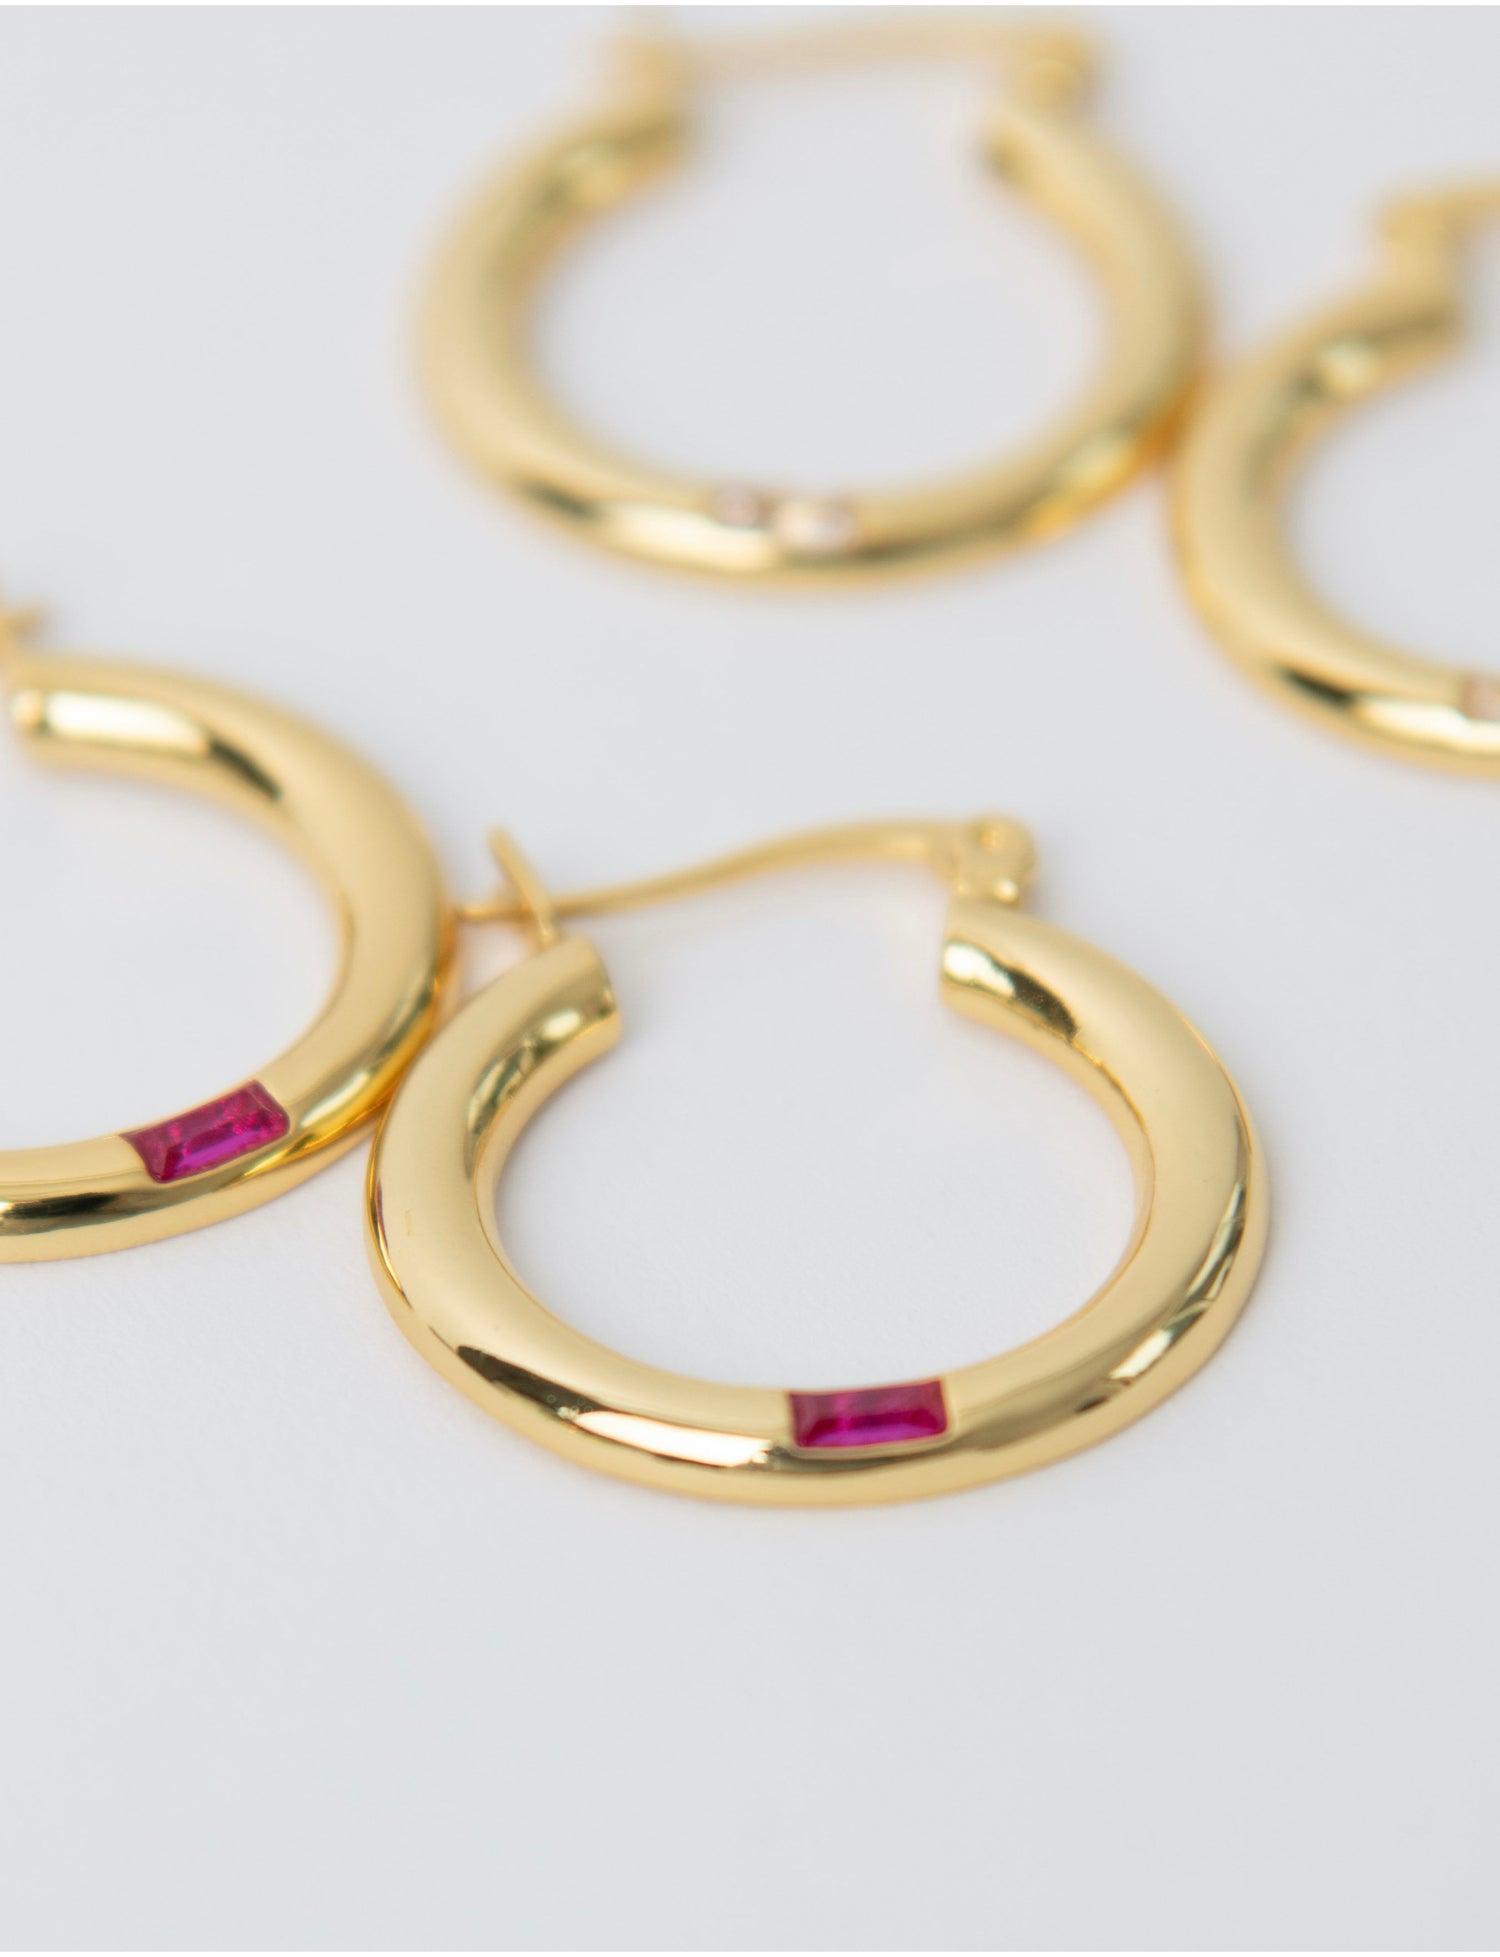 Gold Hoop Earrings with Stone